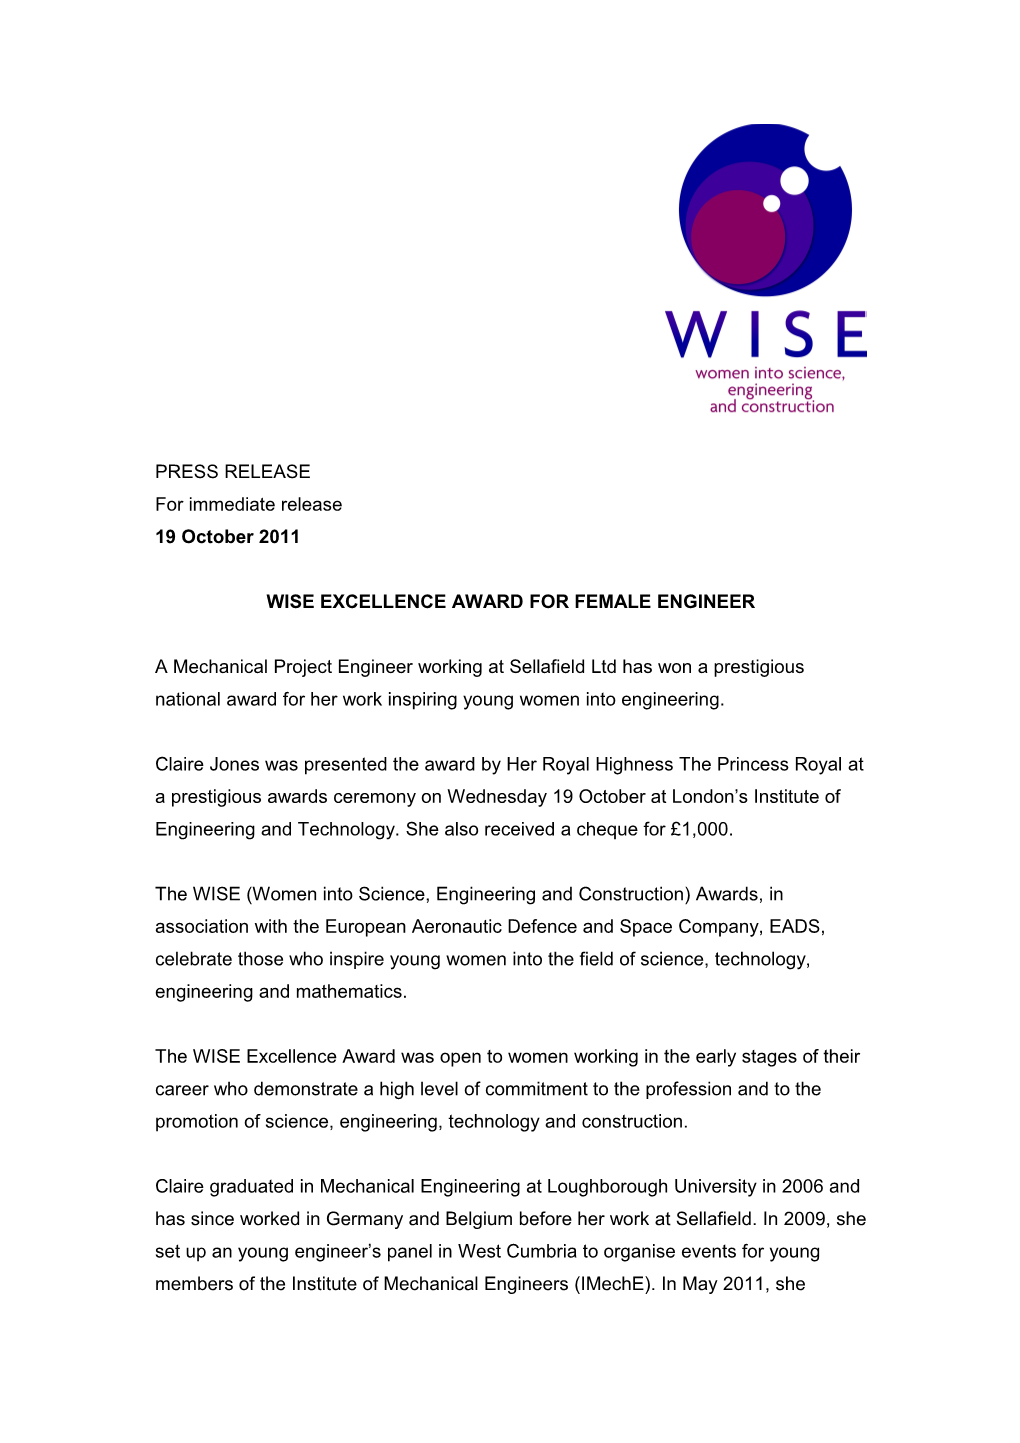 Wise Excellence Award for Female Engineer